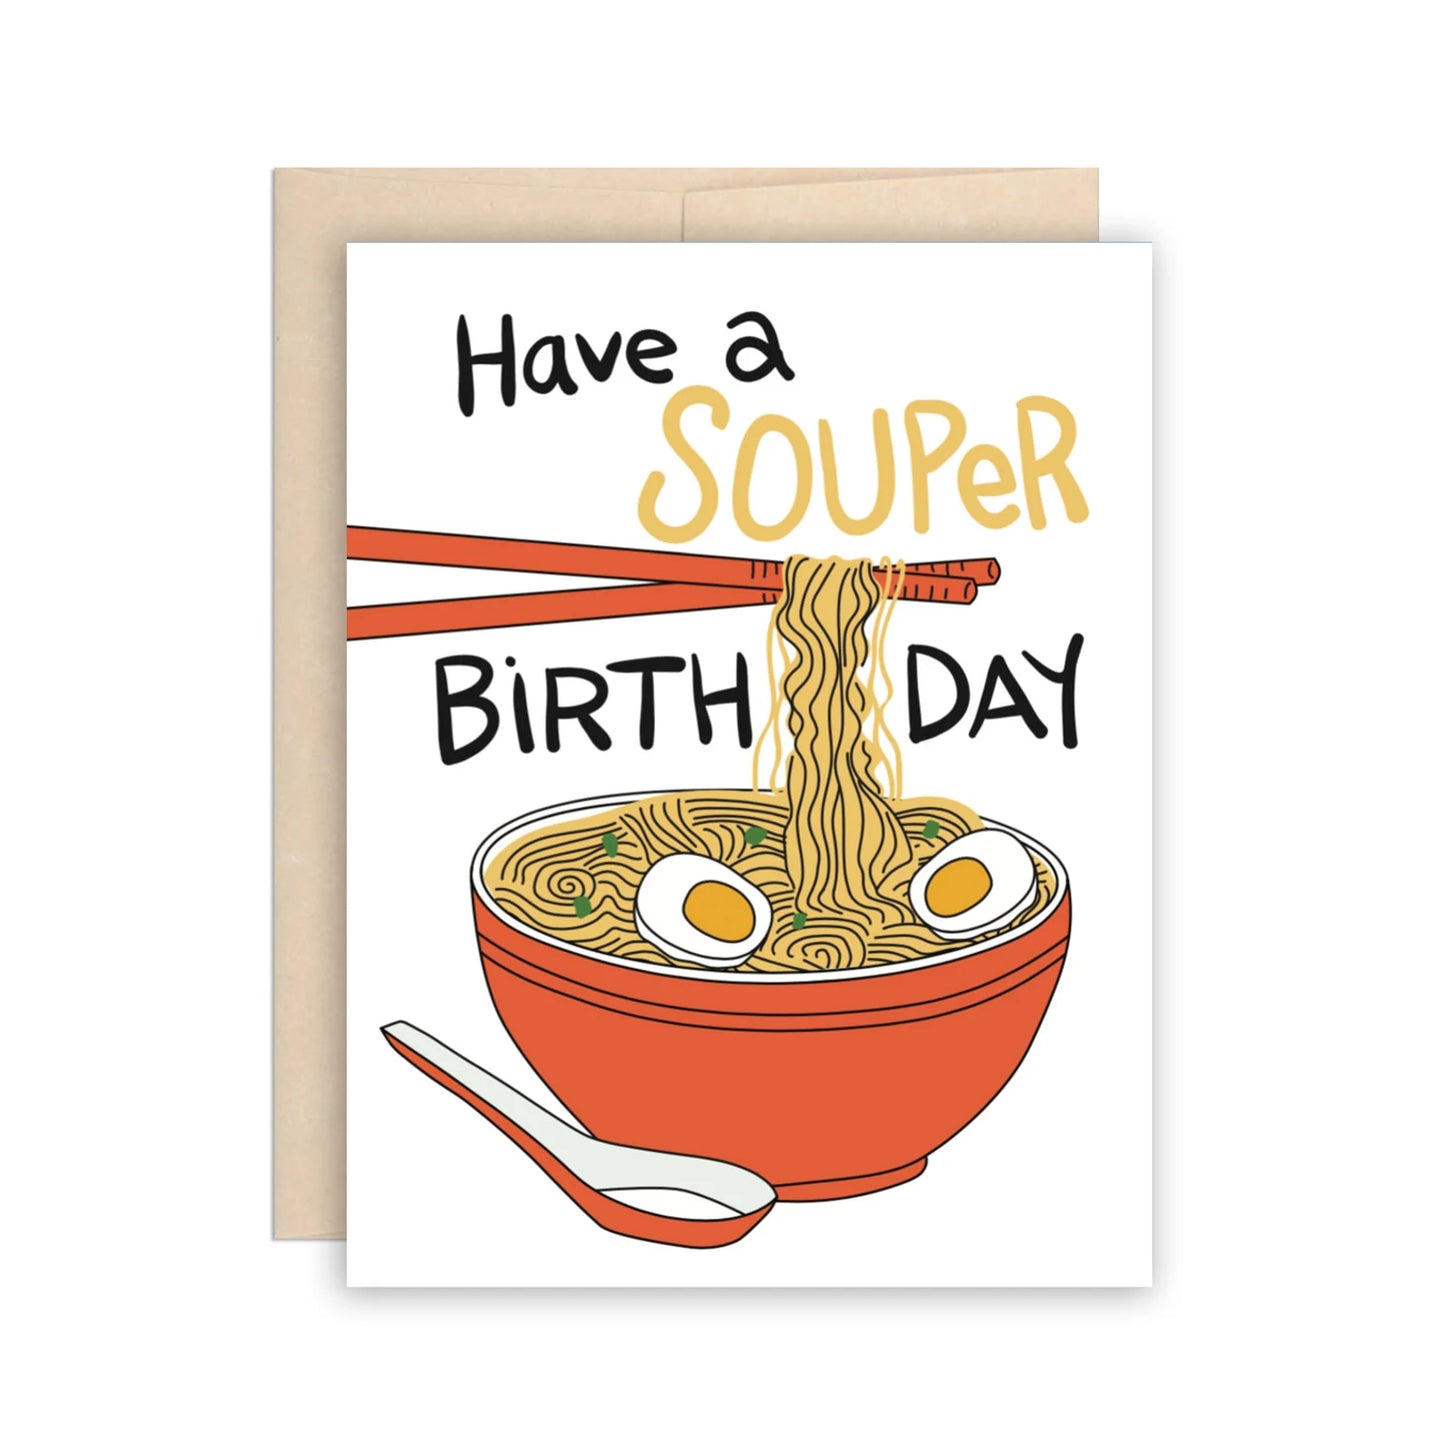 The Beautiful Project - Souper Birthday